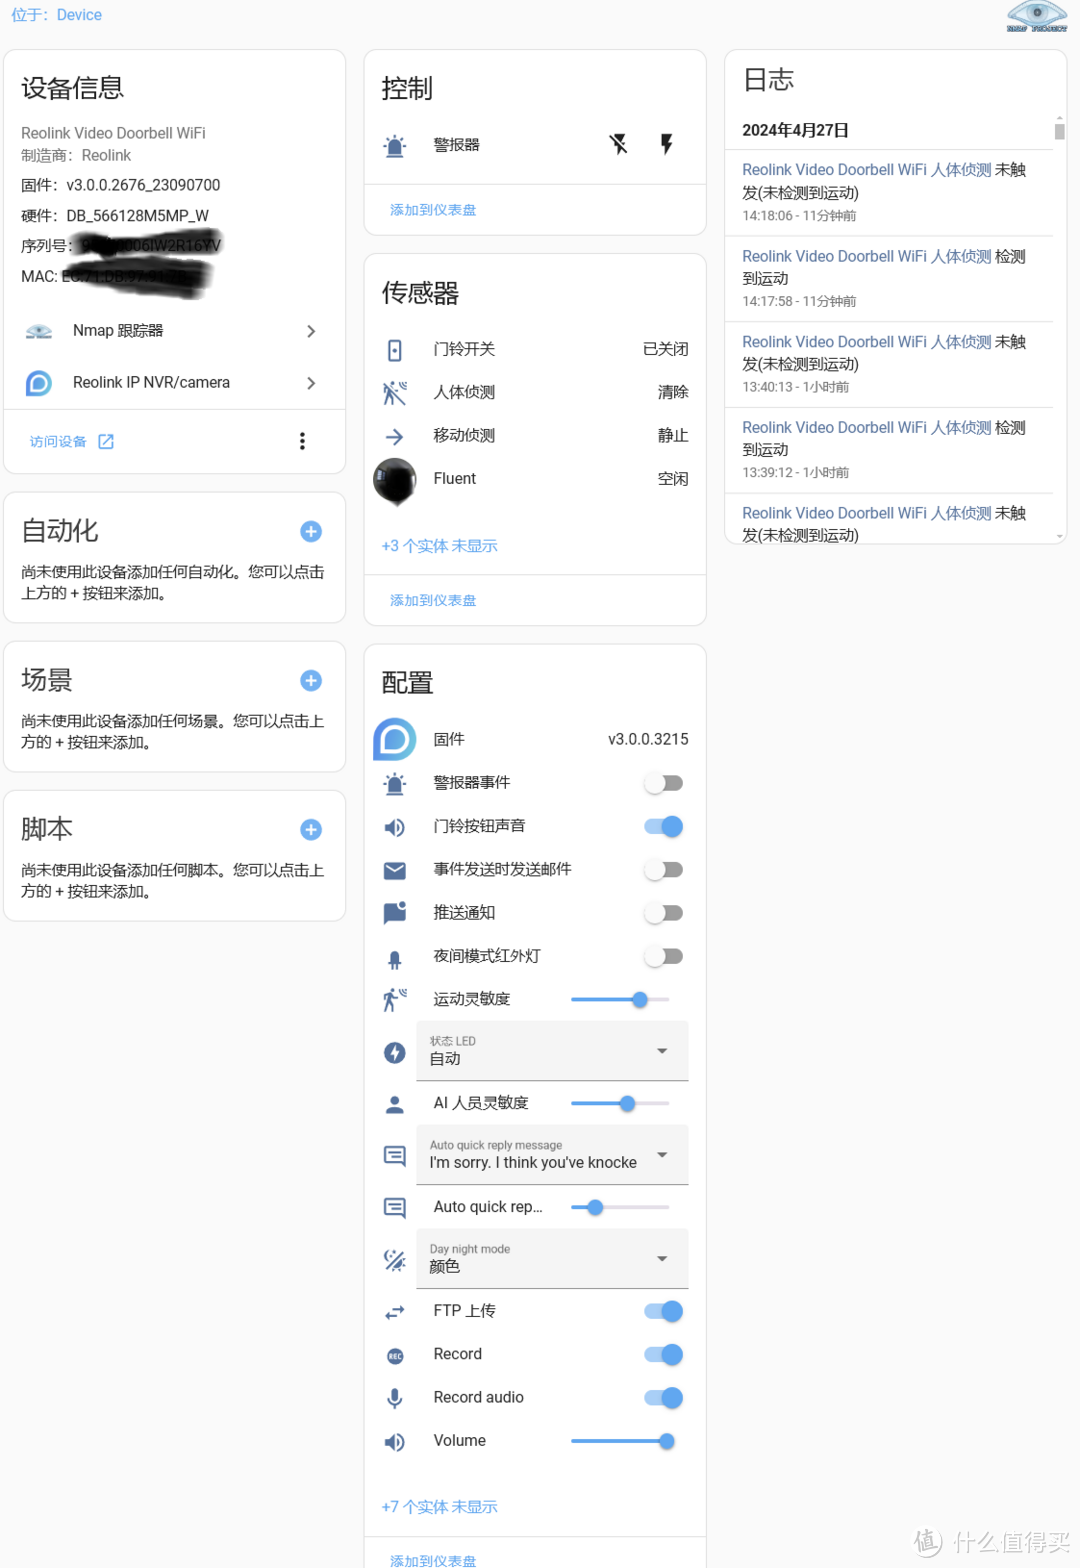 scrypted推荐的猫眼门铃摄像头Reolink Doorbell体验,最适合接入home assistant和homekit的门铃